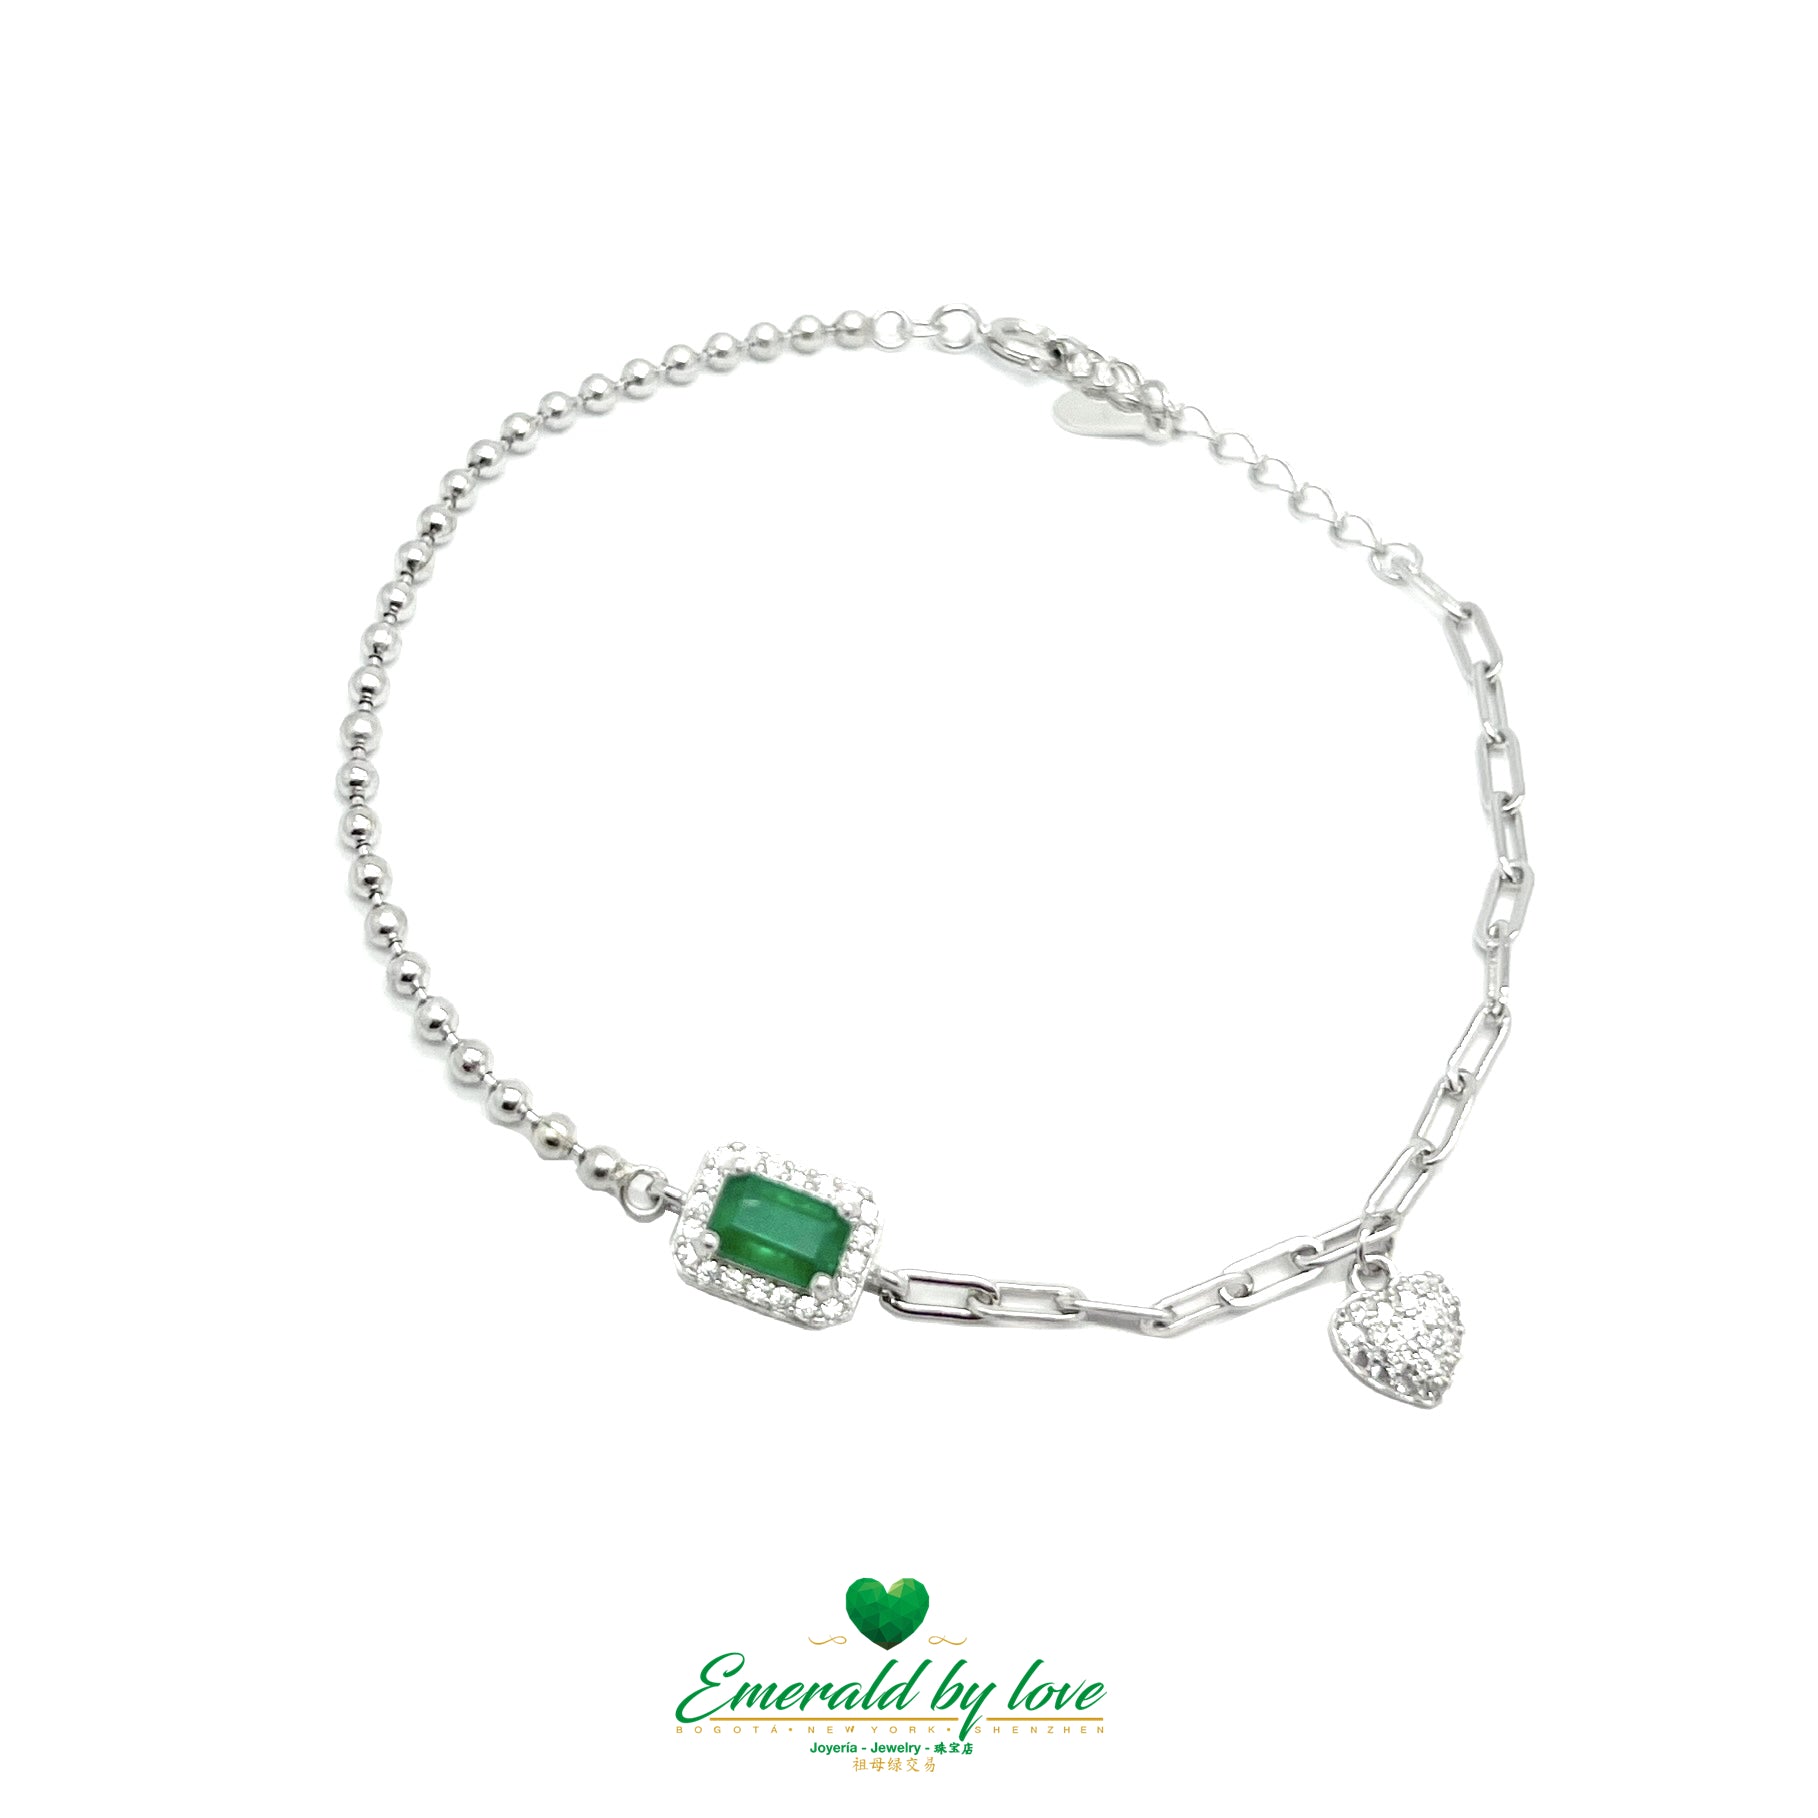 Sterling Silver Bracelet with Double Charm Featuring Colombian Baguette Emerald